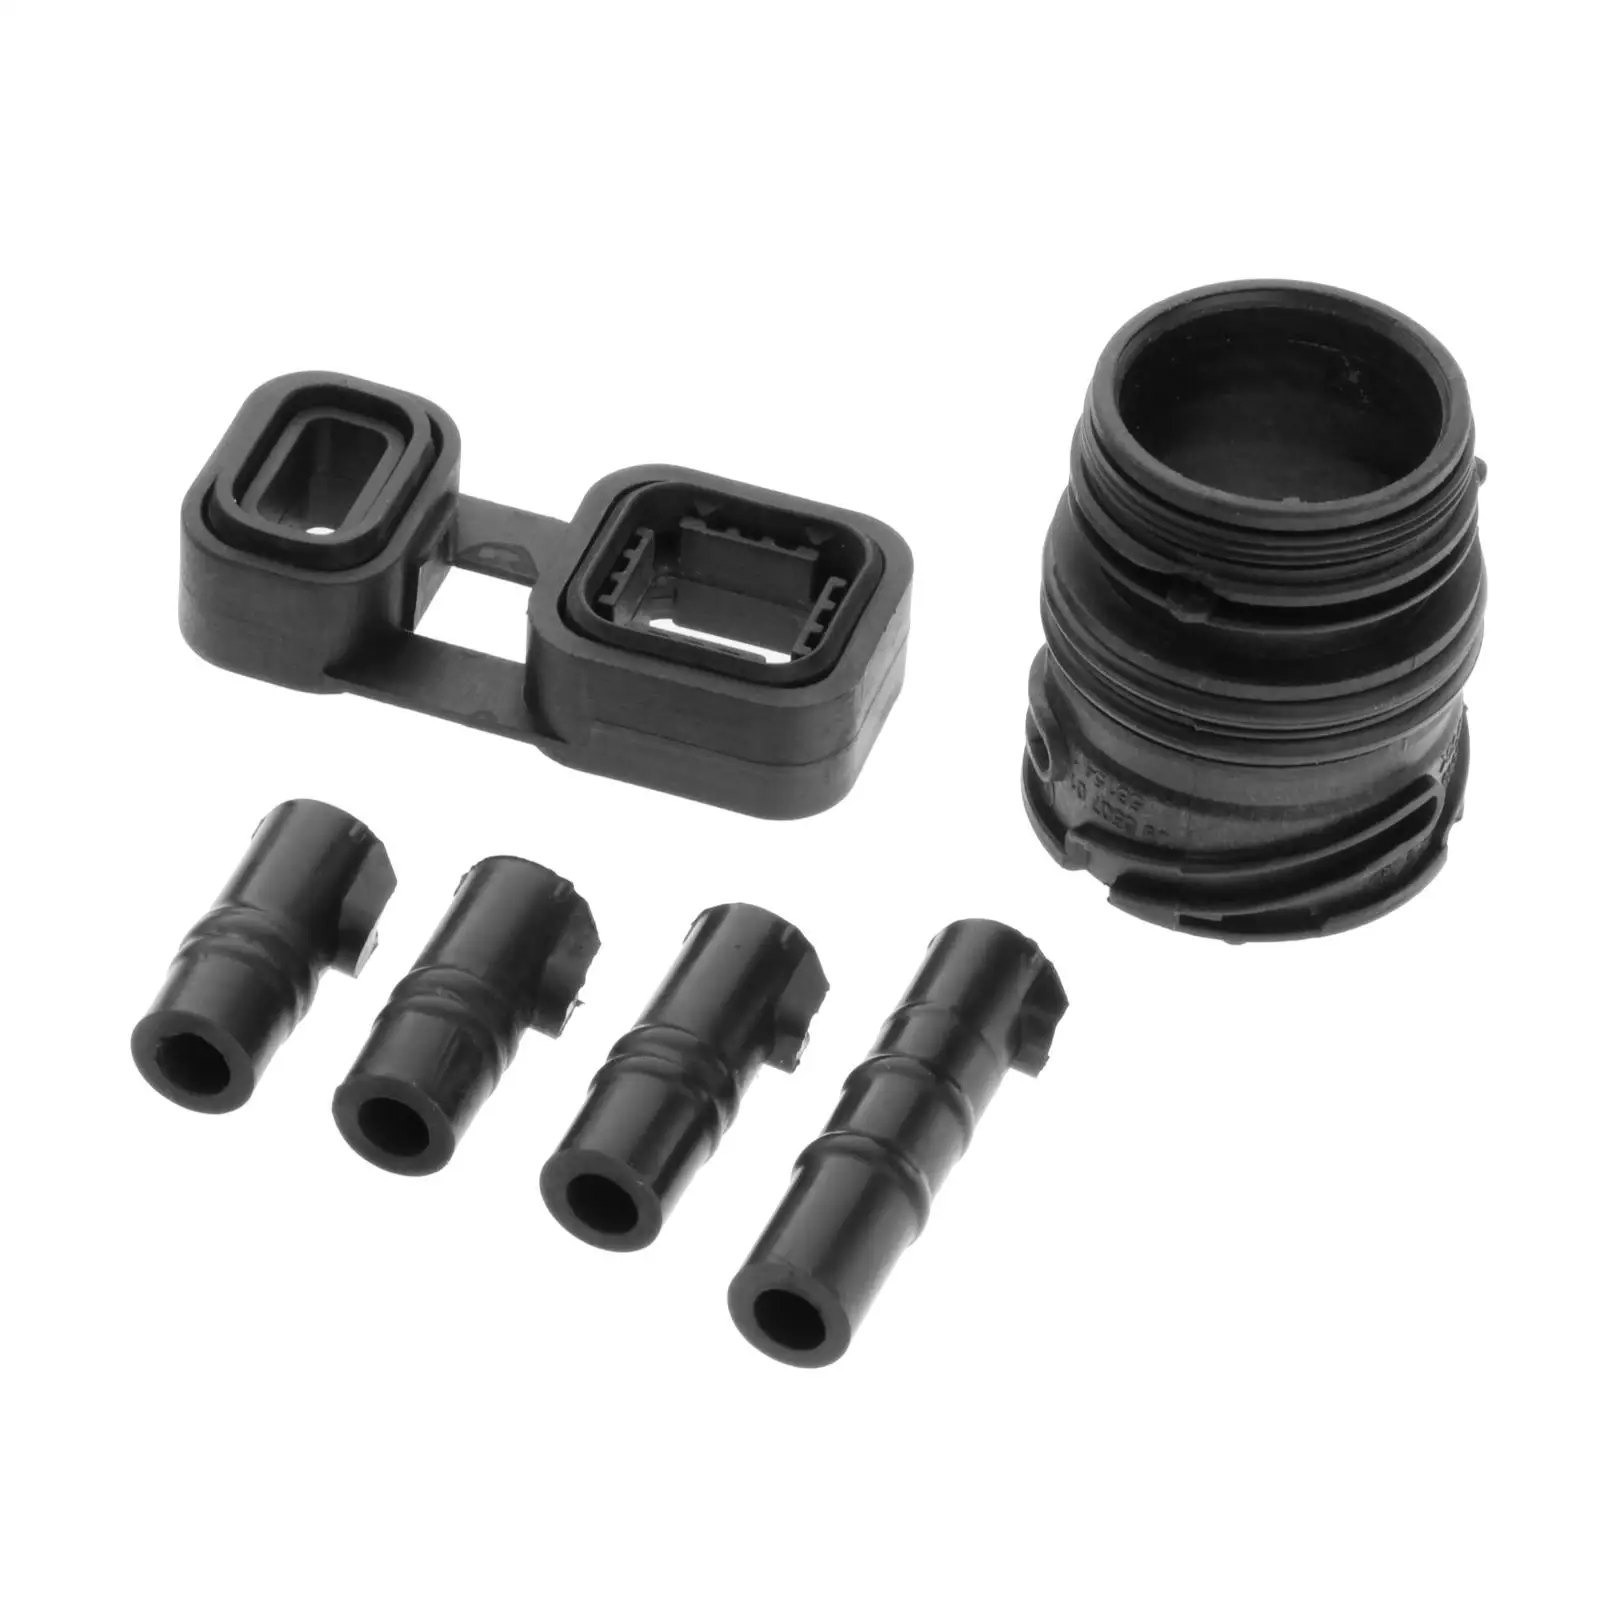 6HP19 6HP26 Automatic  Adapter Seals Valve Body To Case Sleeve Connector Seal 6pcs for BMW Transmission